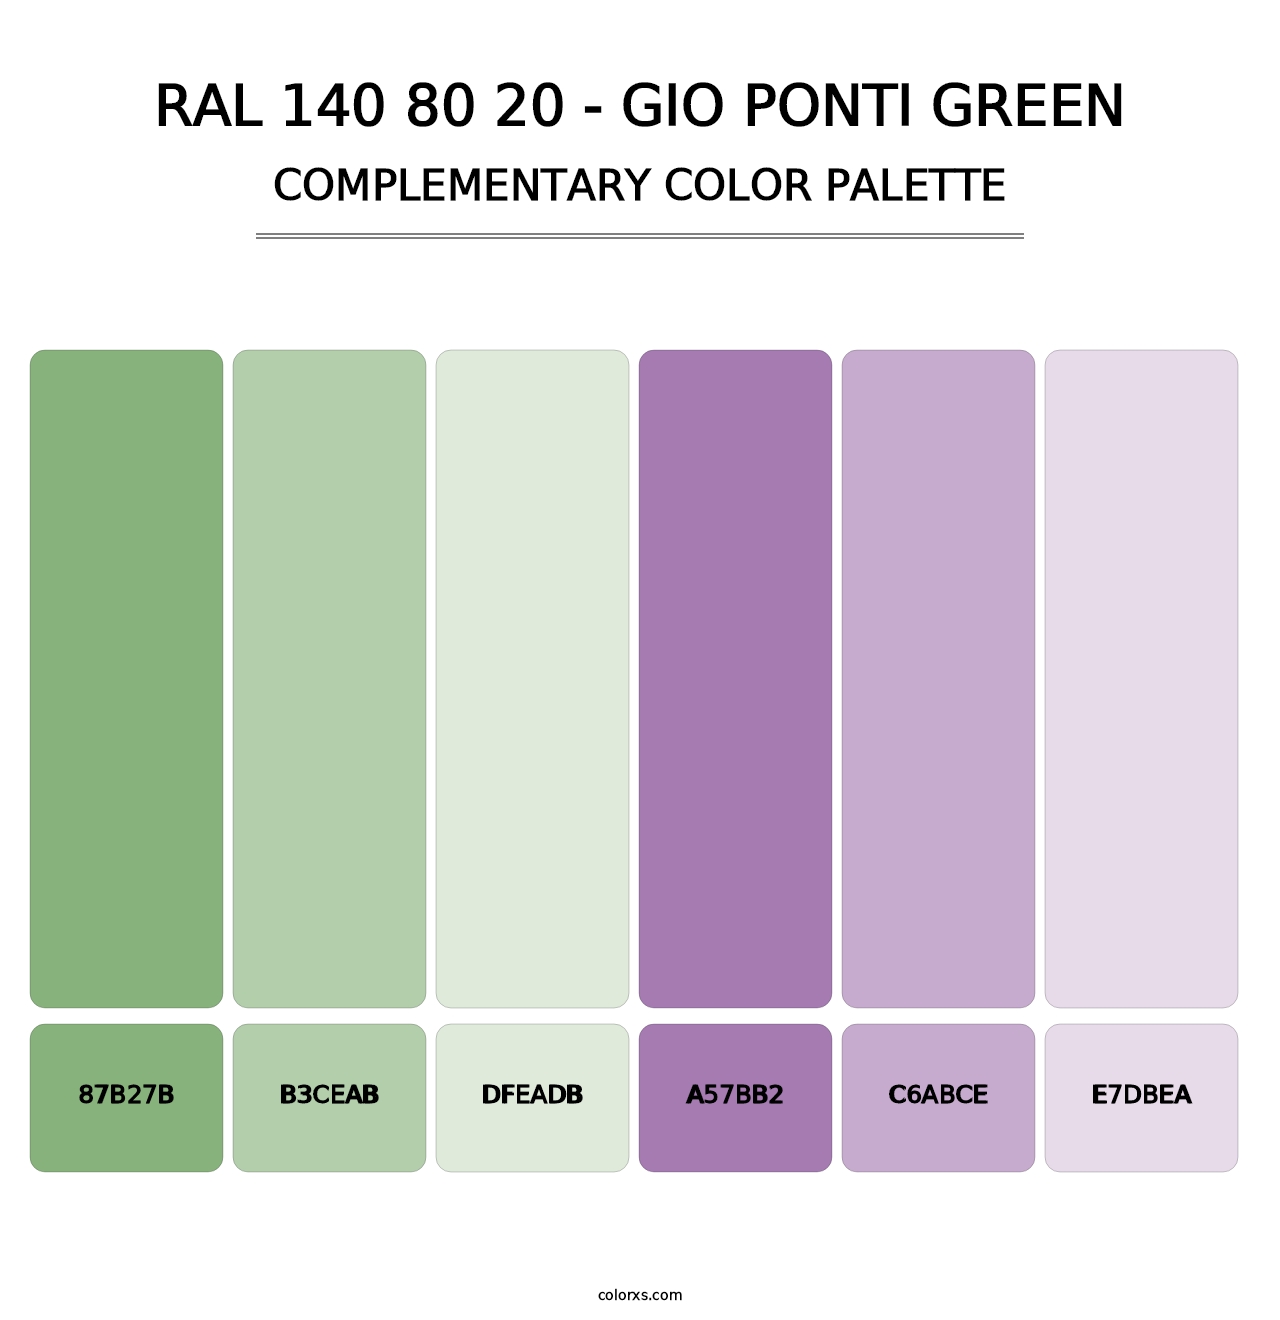 RAL 140 80 20 - Gio Ponti Green - Complementary Color Palette